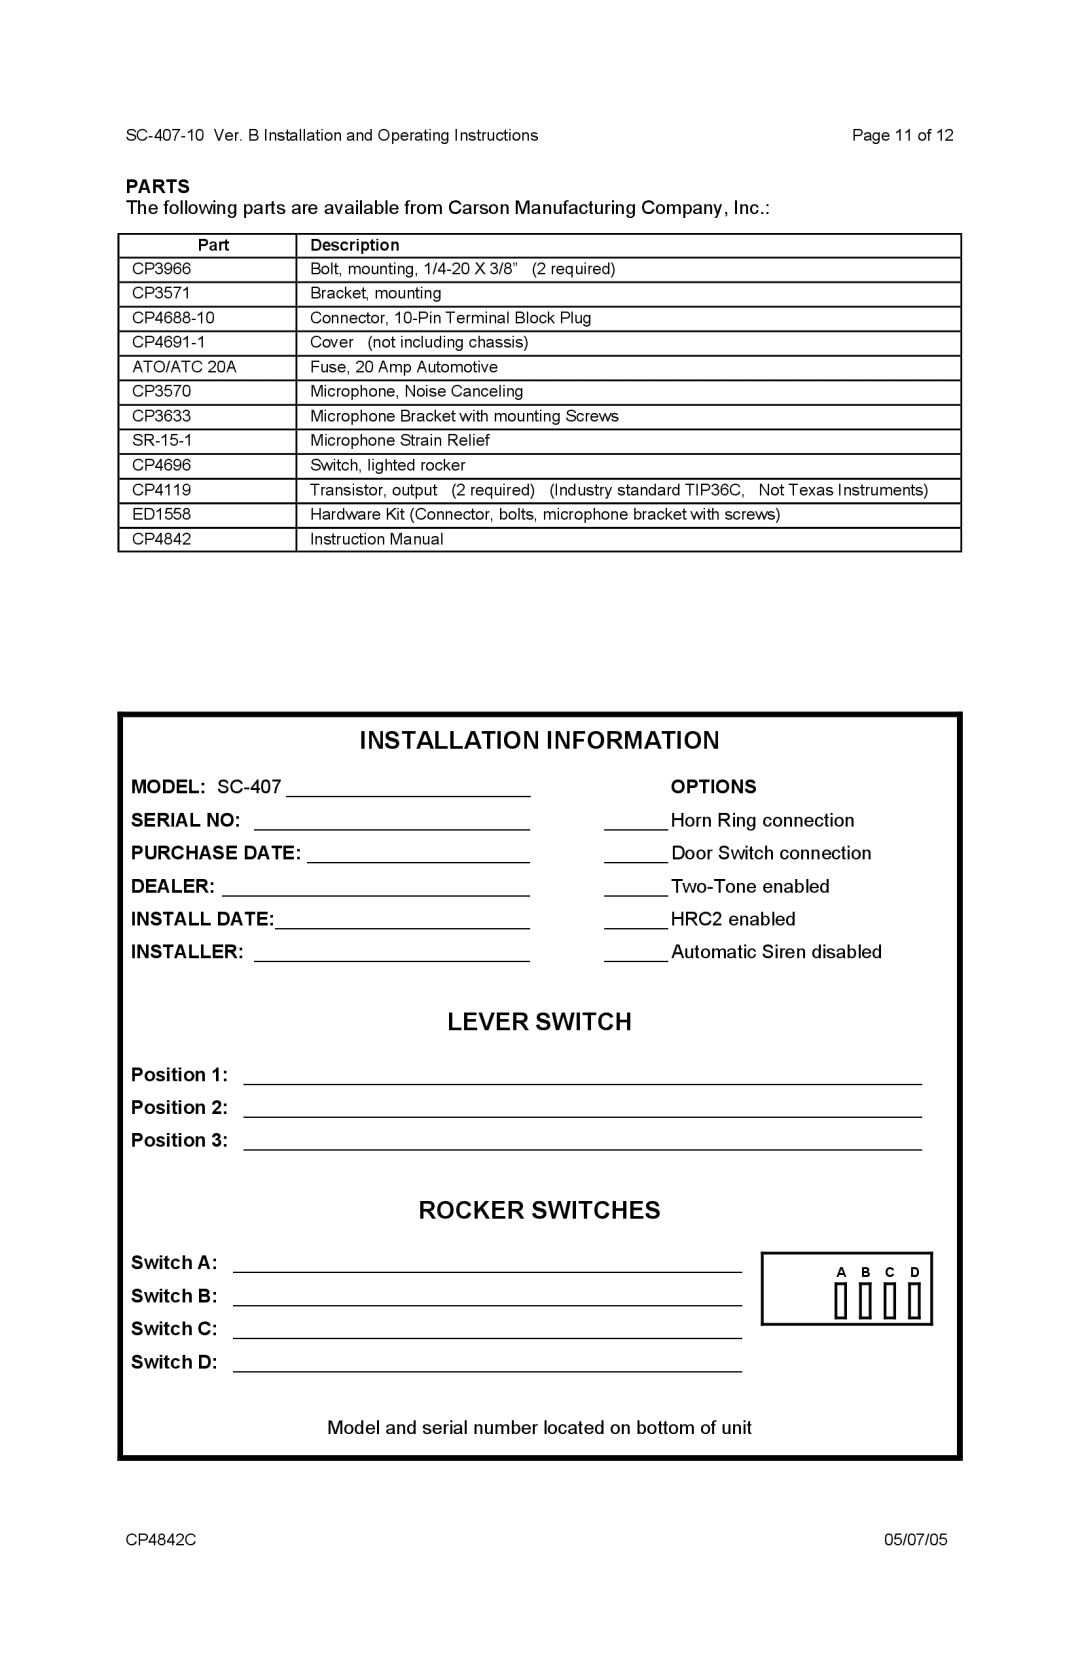 Carson SC-407 operating instructions Installation Information, Lever Switch, Rocker Switches 